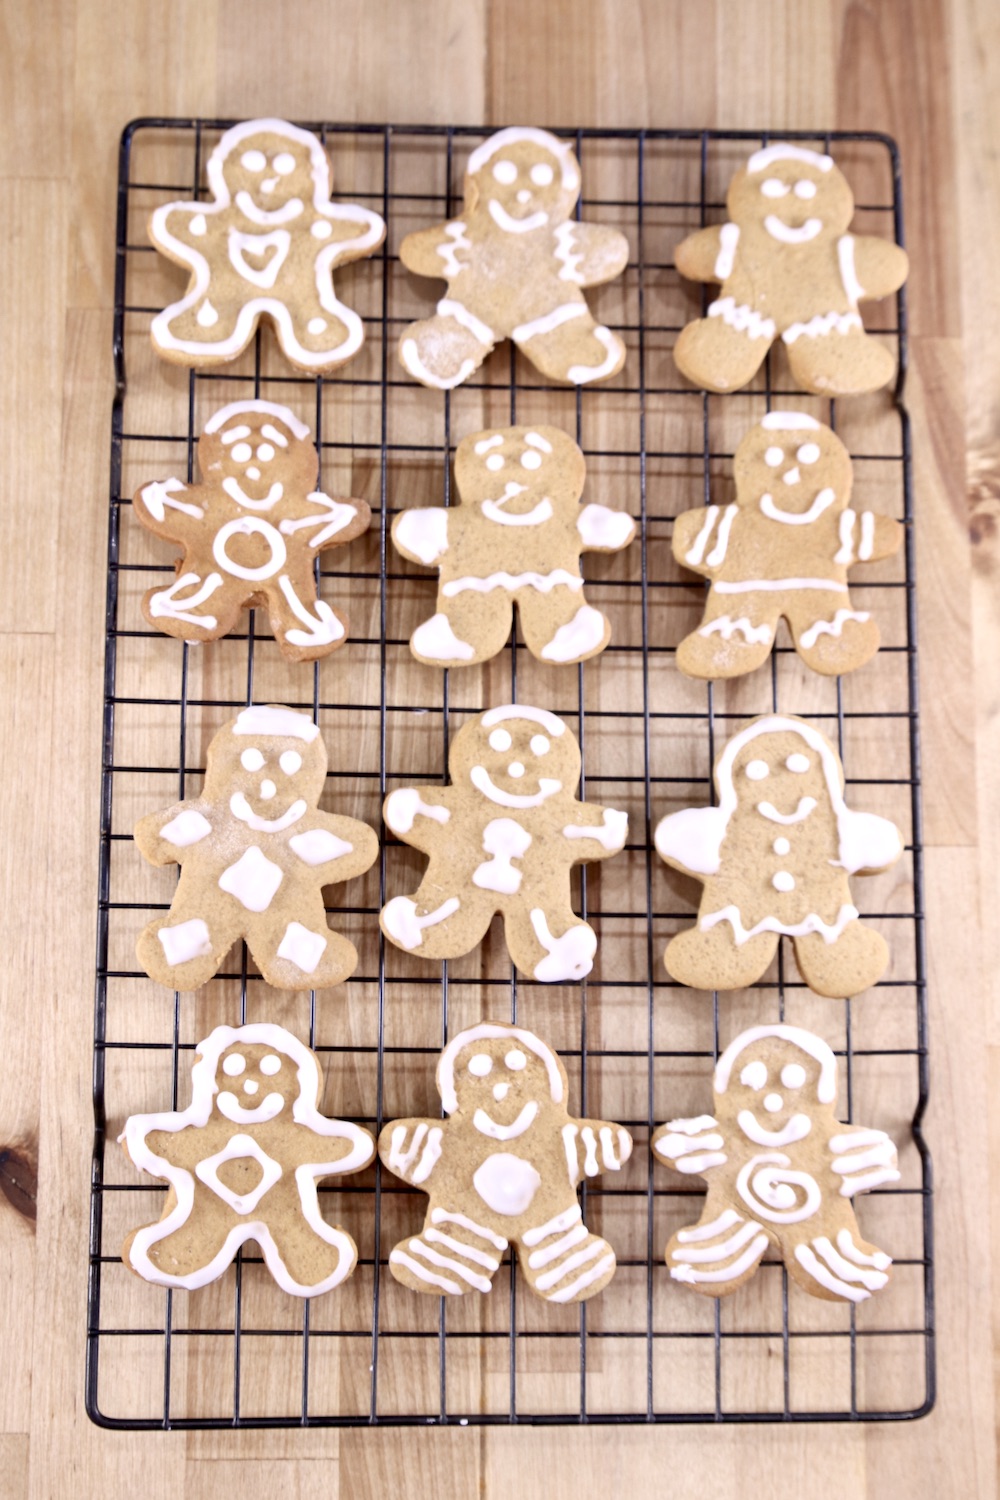 Decorated gingerbread men cookies on a wire rack